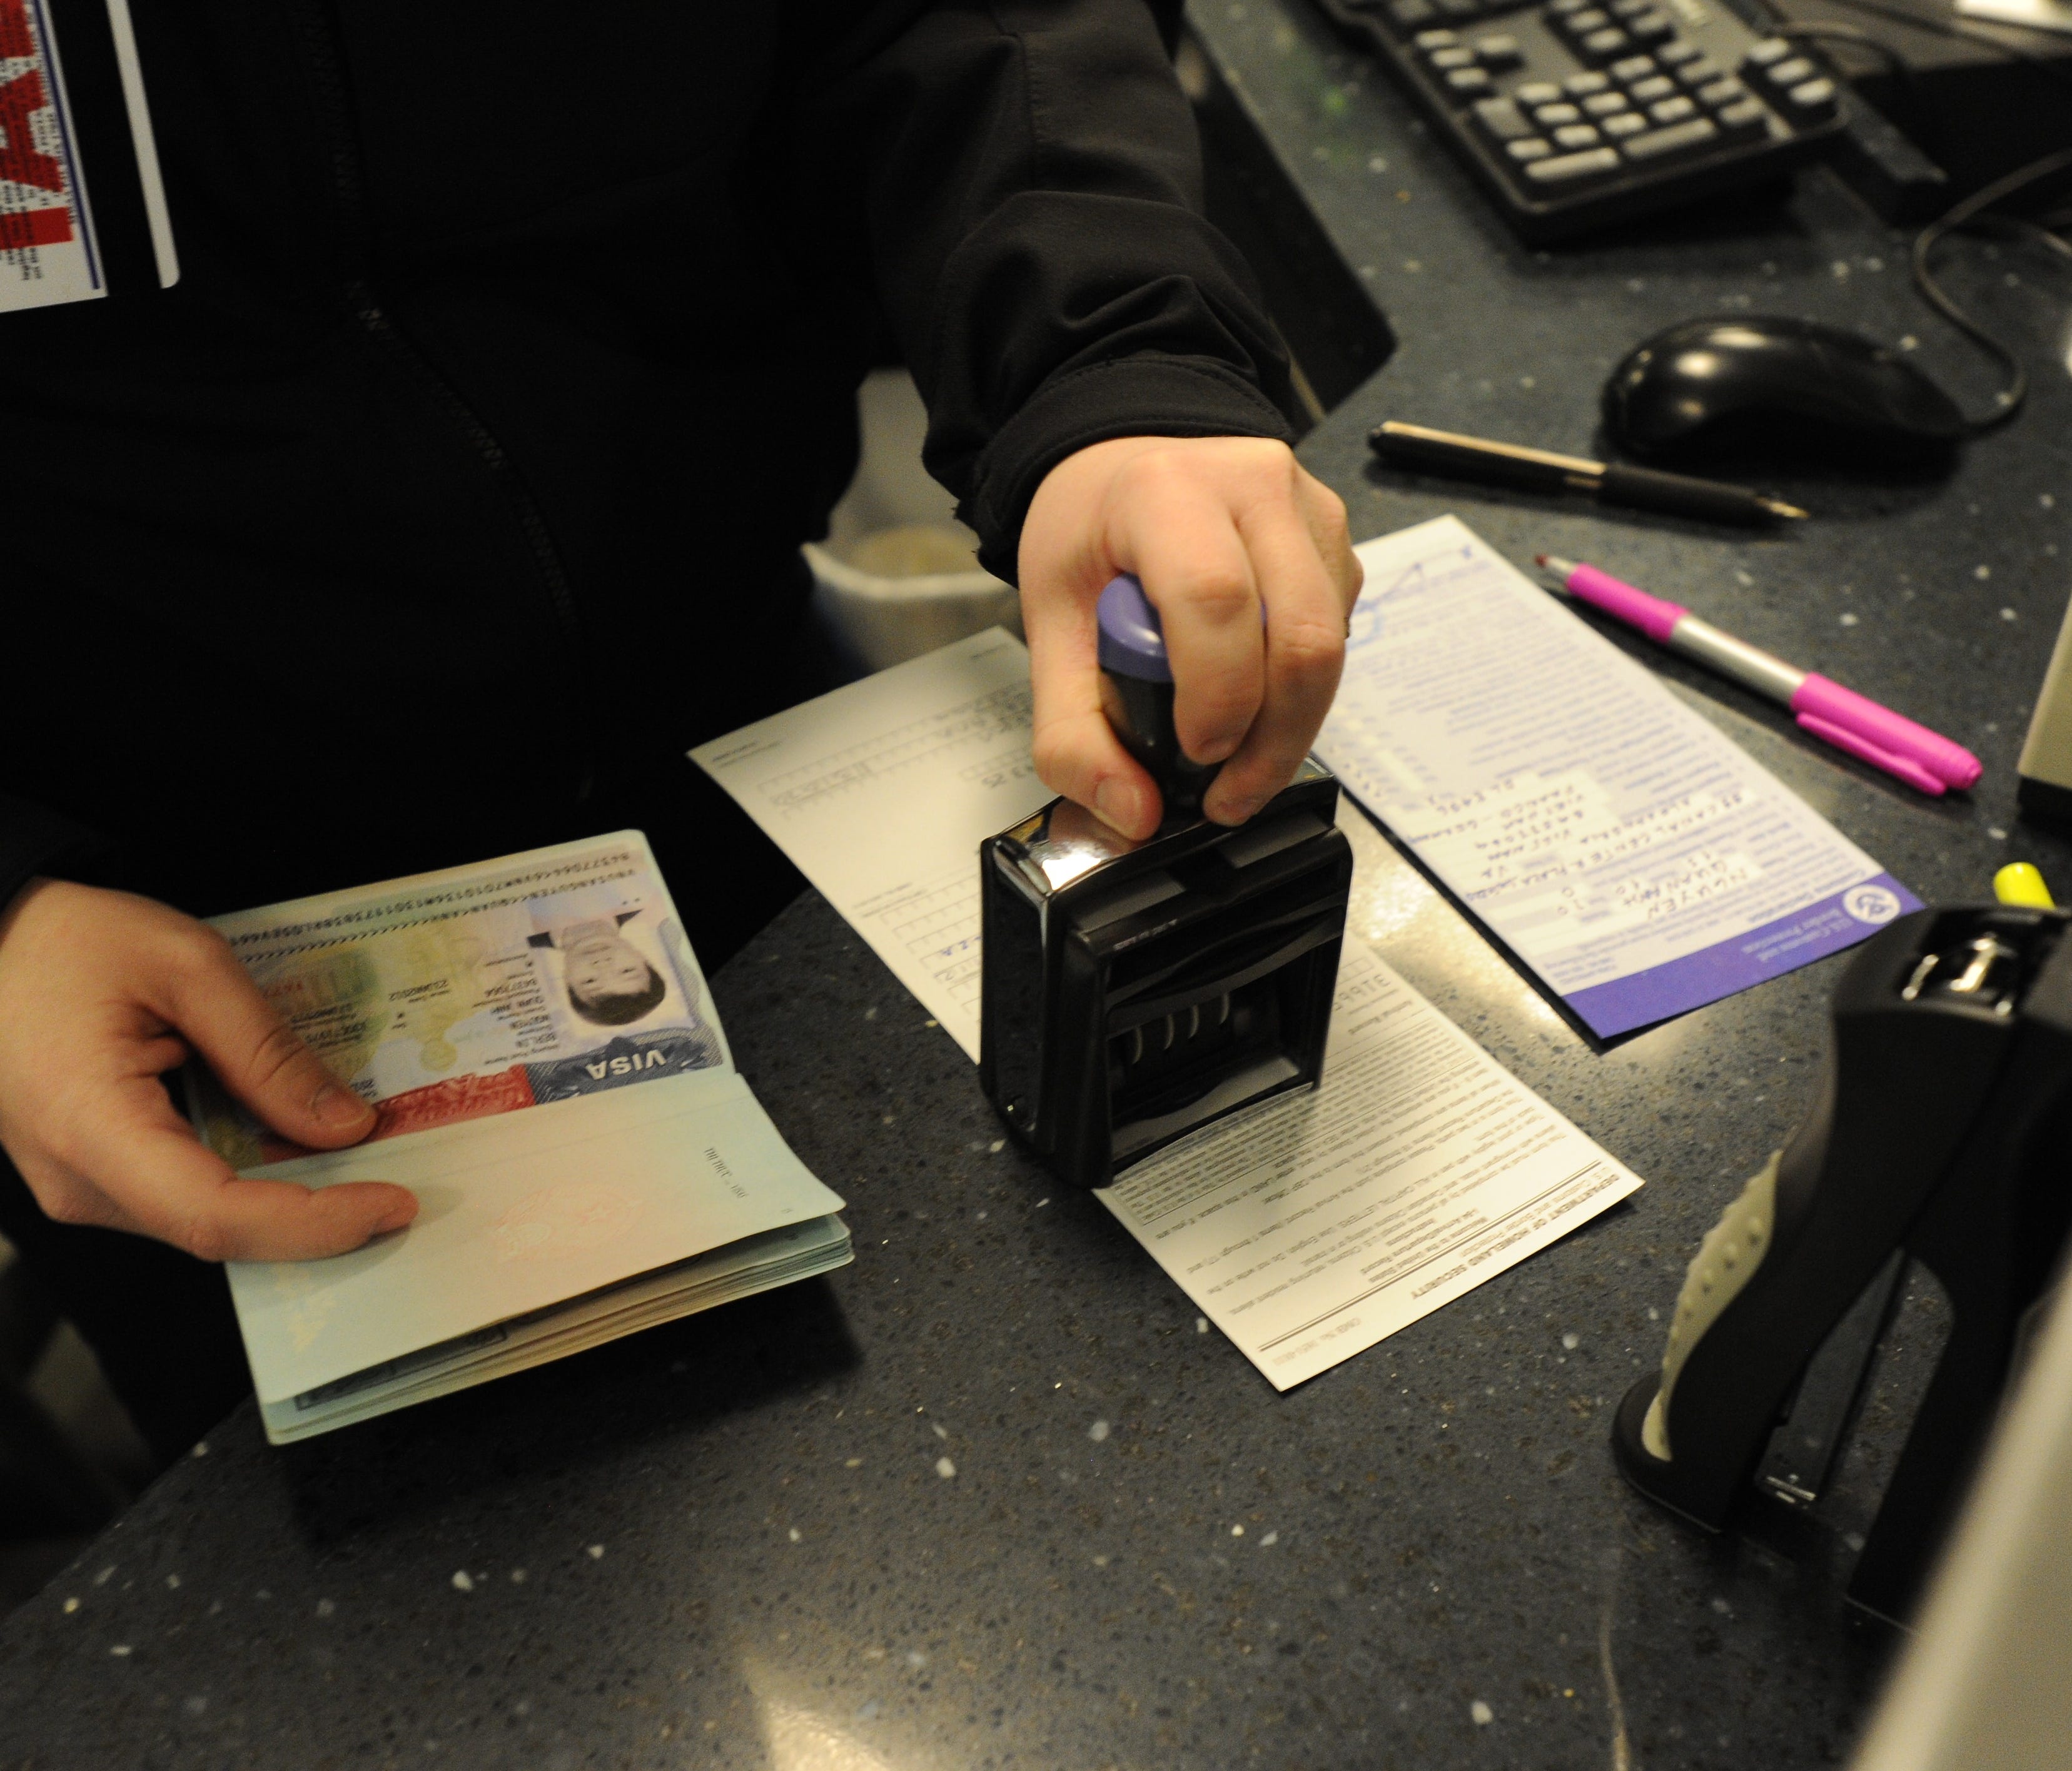 Customs agent Rebecca O'Neill stamps a visa of a non-U.S. citizen traveler at the primary inspection area at Dulles International Airport.